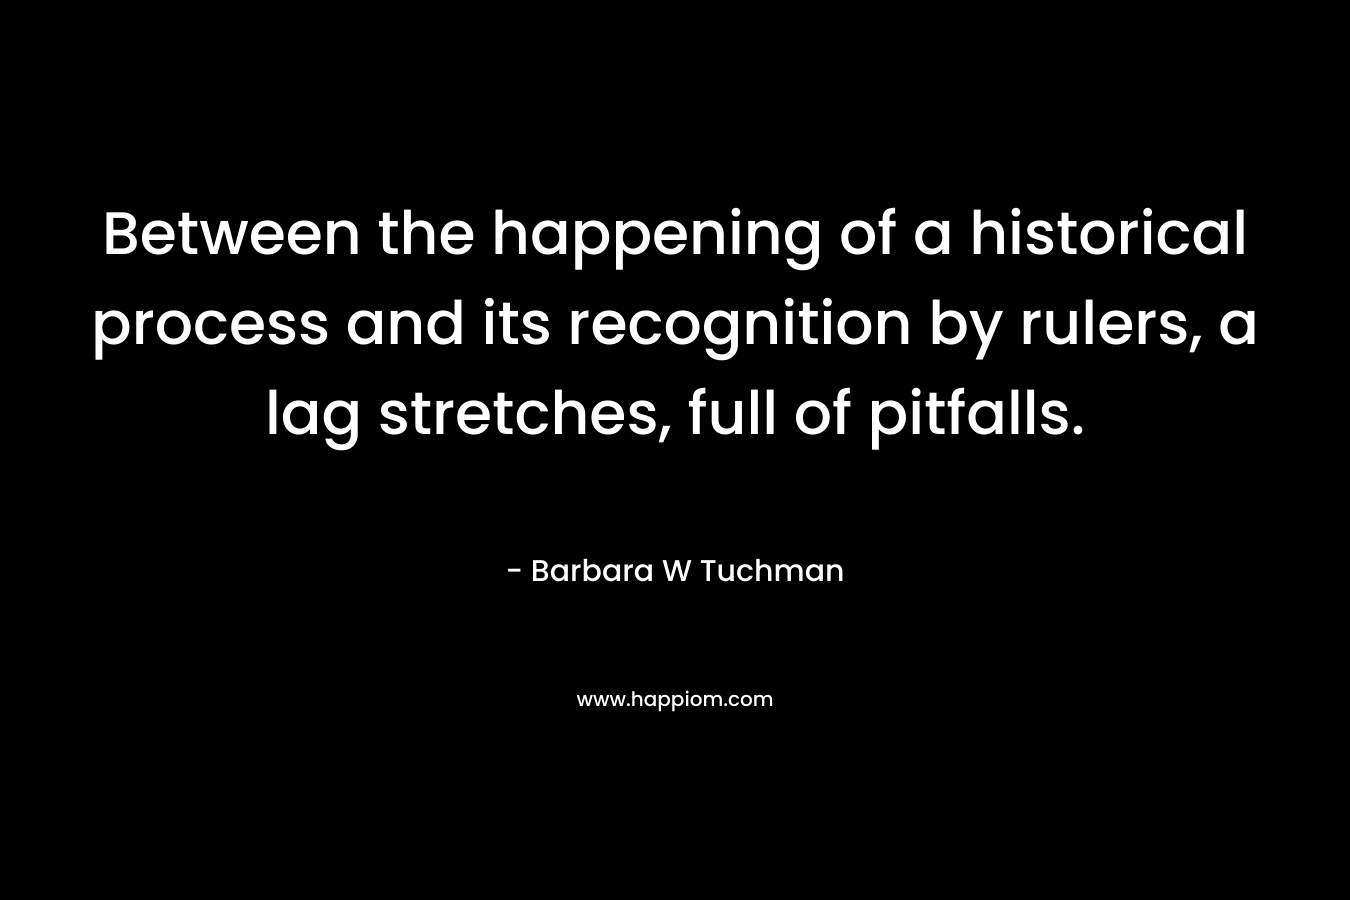 Between the happening of a historical process and its recognition by rulers, a lag stretches, full of pitfalls. – Barbara W Tuchman